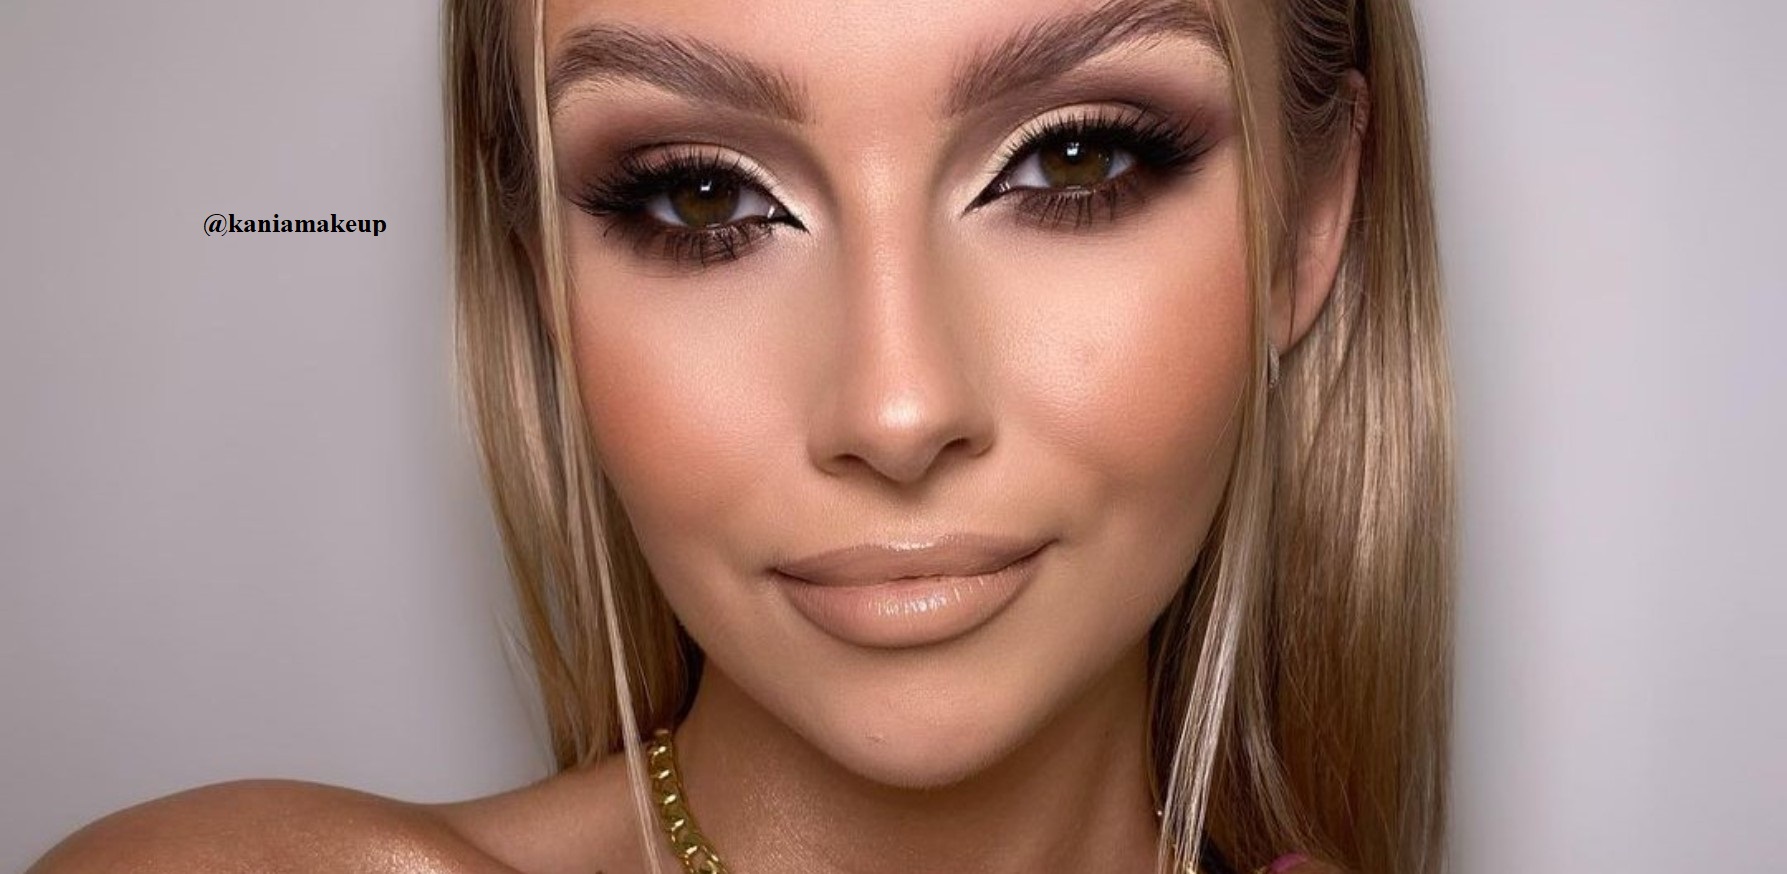 Bronzer Makeup Looks Are Everywhere, Here Is How To Dive Into The Trend